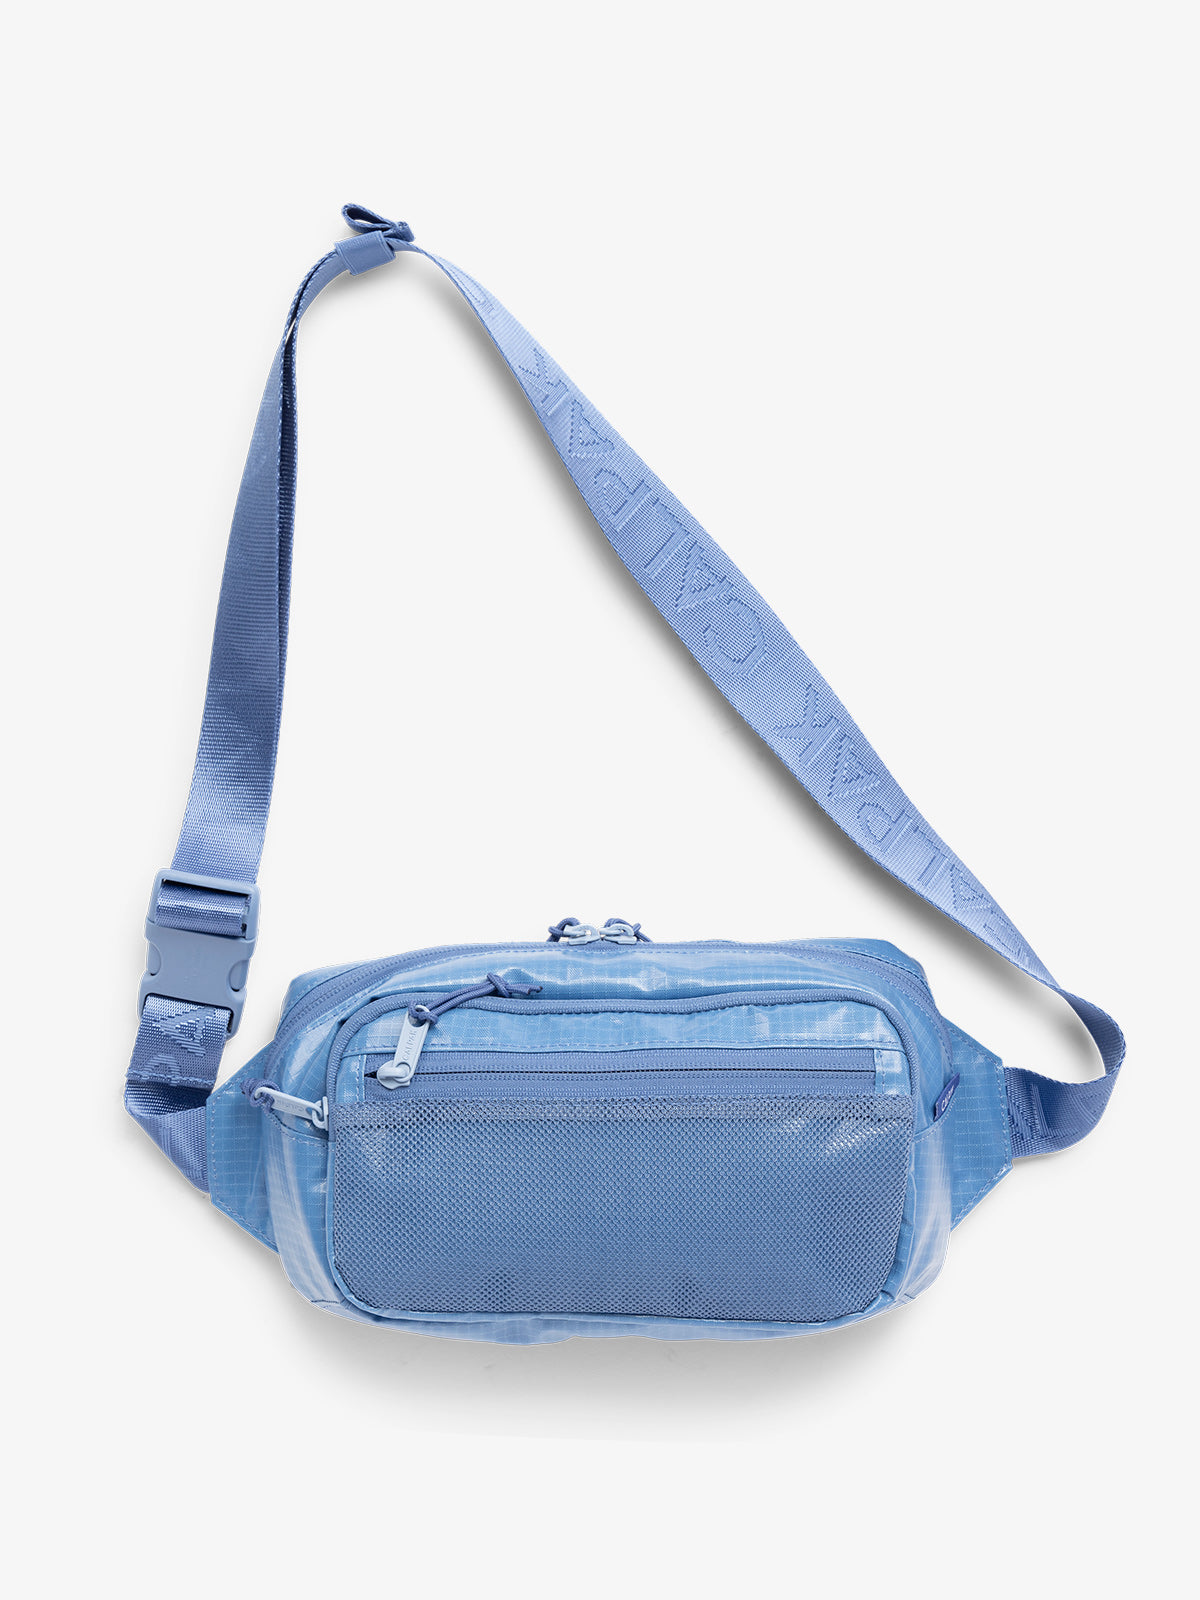 Terra small sling bag with adjustable nylon strap in blue